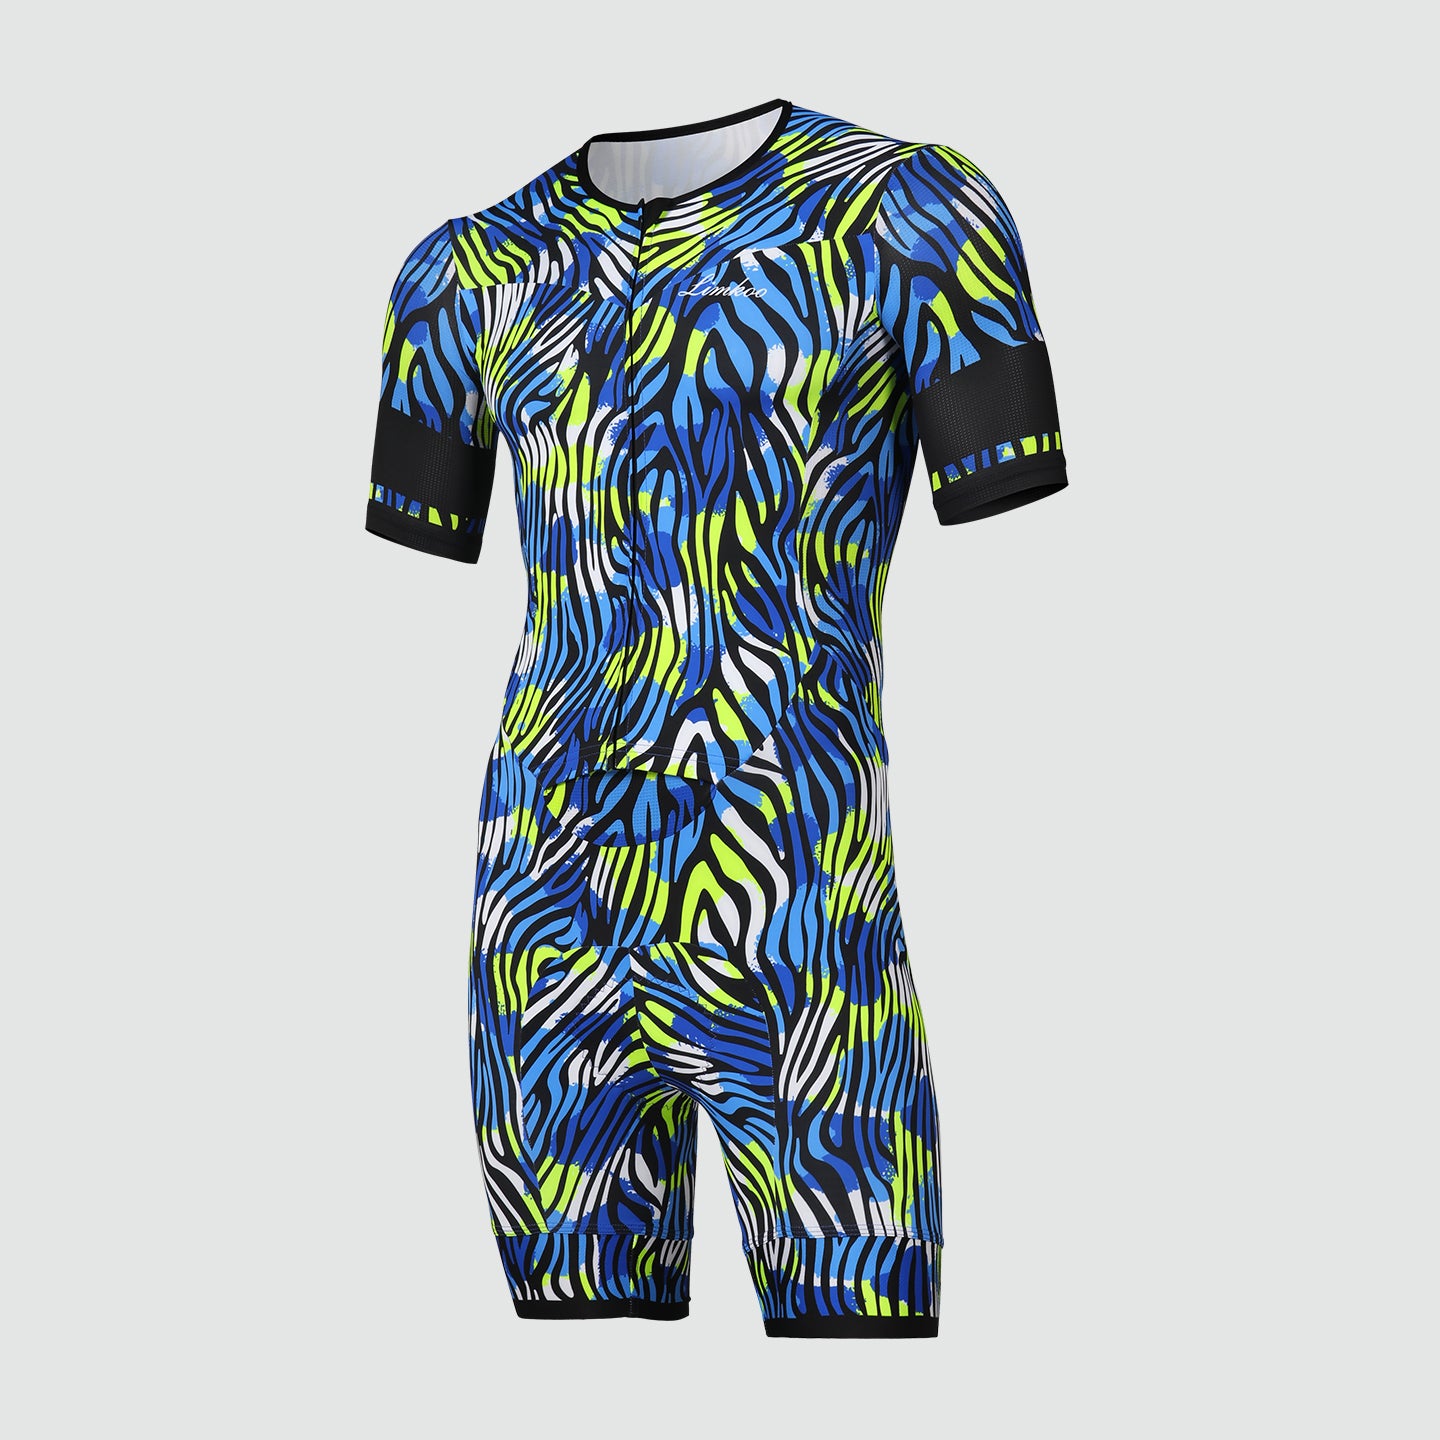 MOX SS TRI SUIT